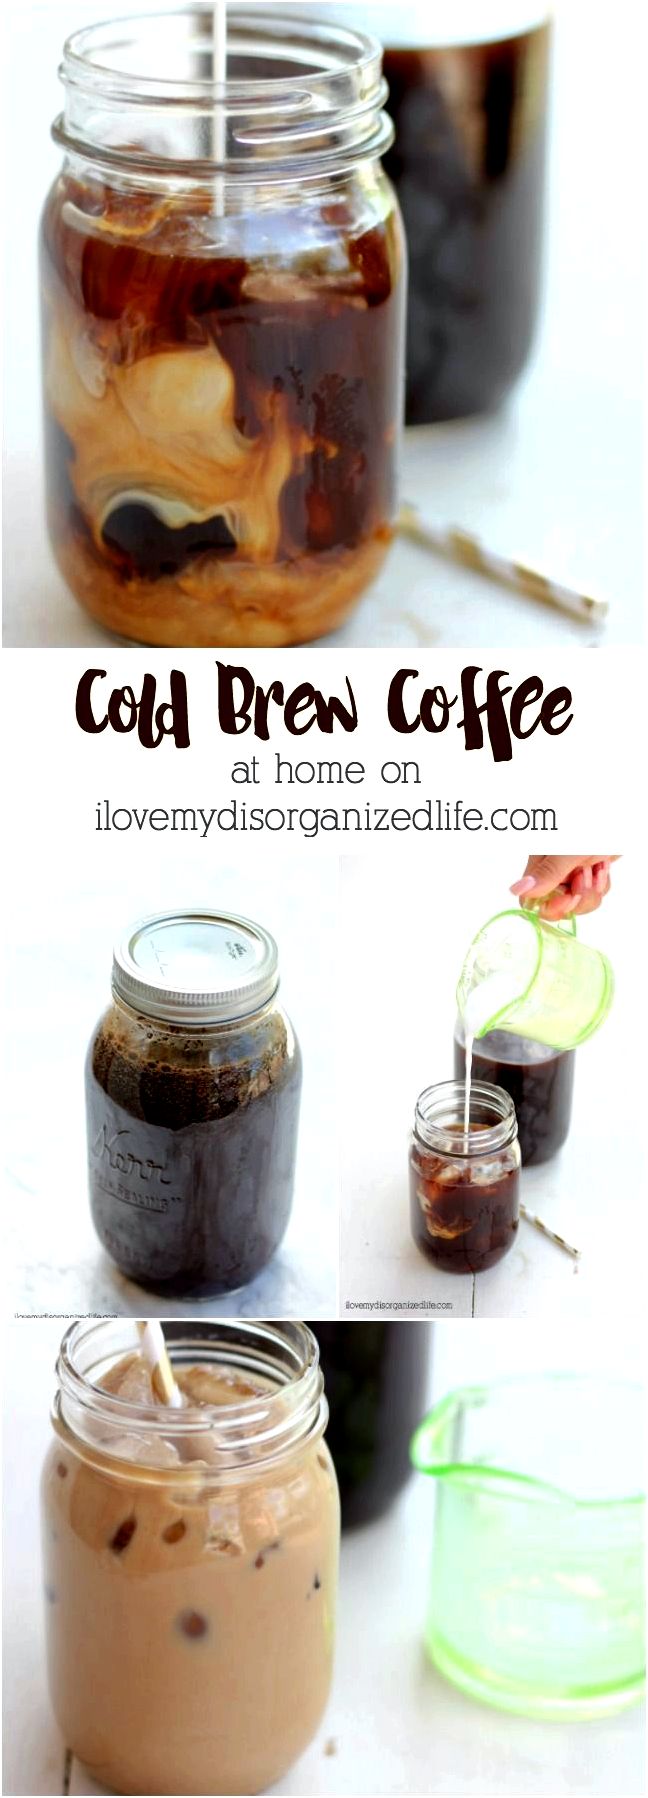 Anybody ever attempted infusing cold-brew coffee in milk rather water? : coffee new ways